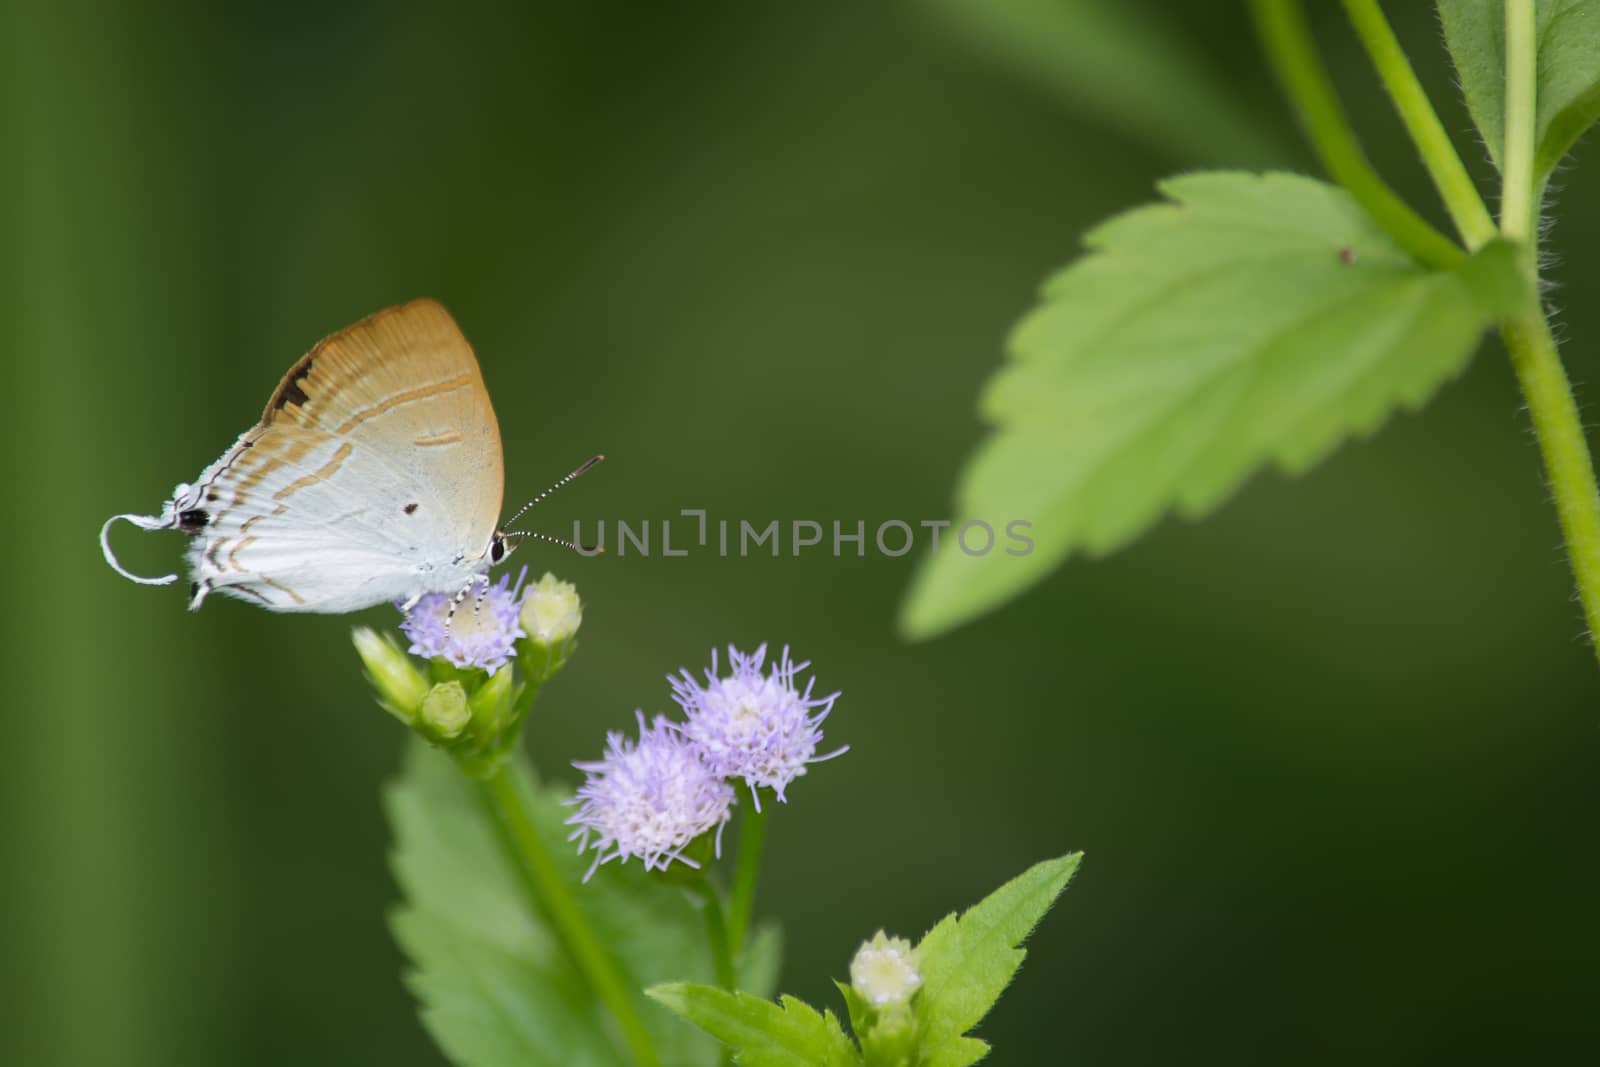 Fluffy Tit butterfly, Hypolycaena amasa on wild weed flower.